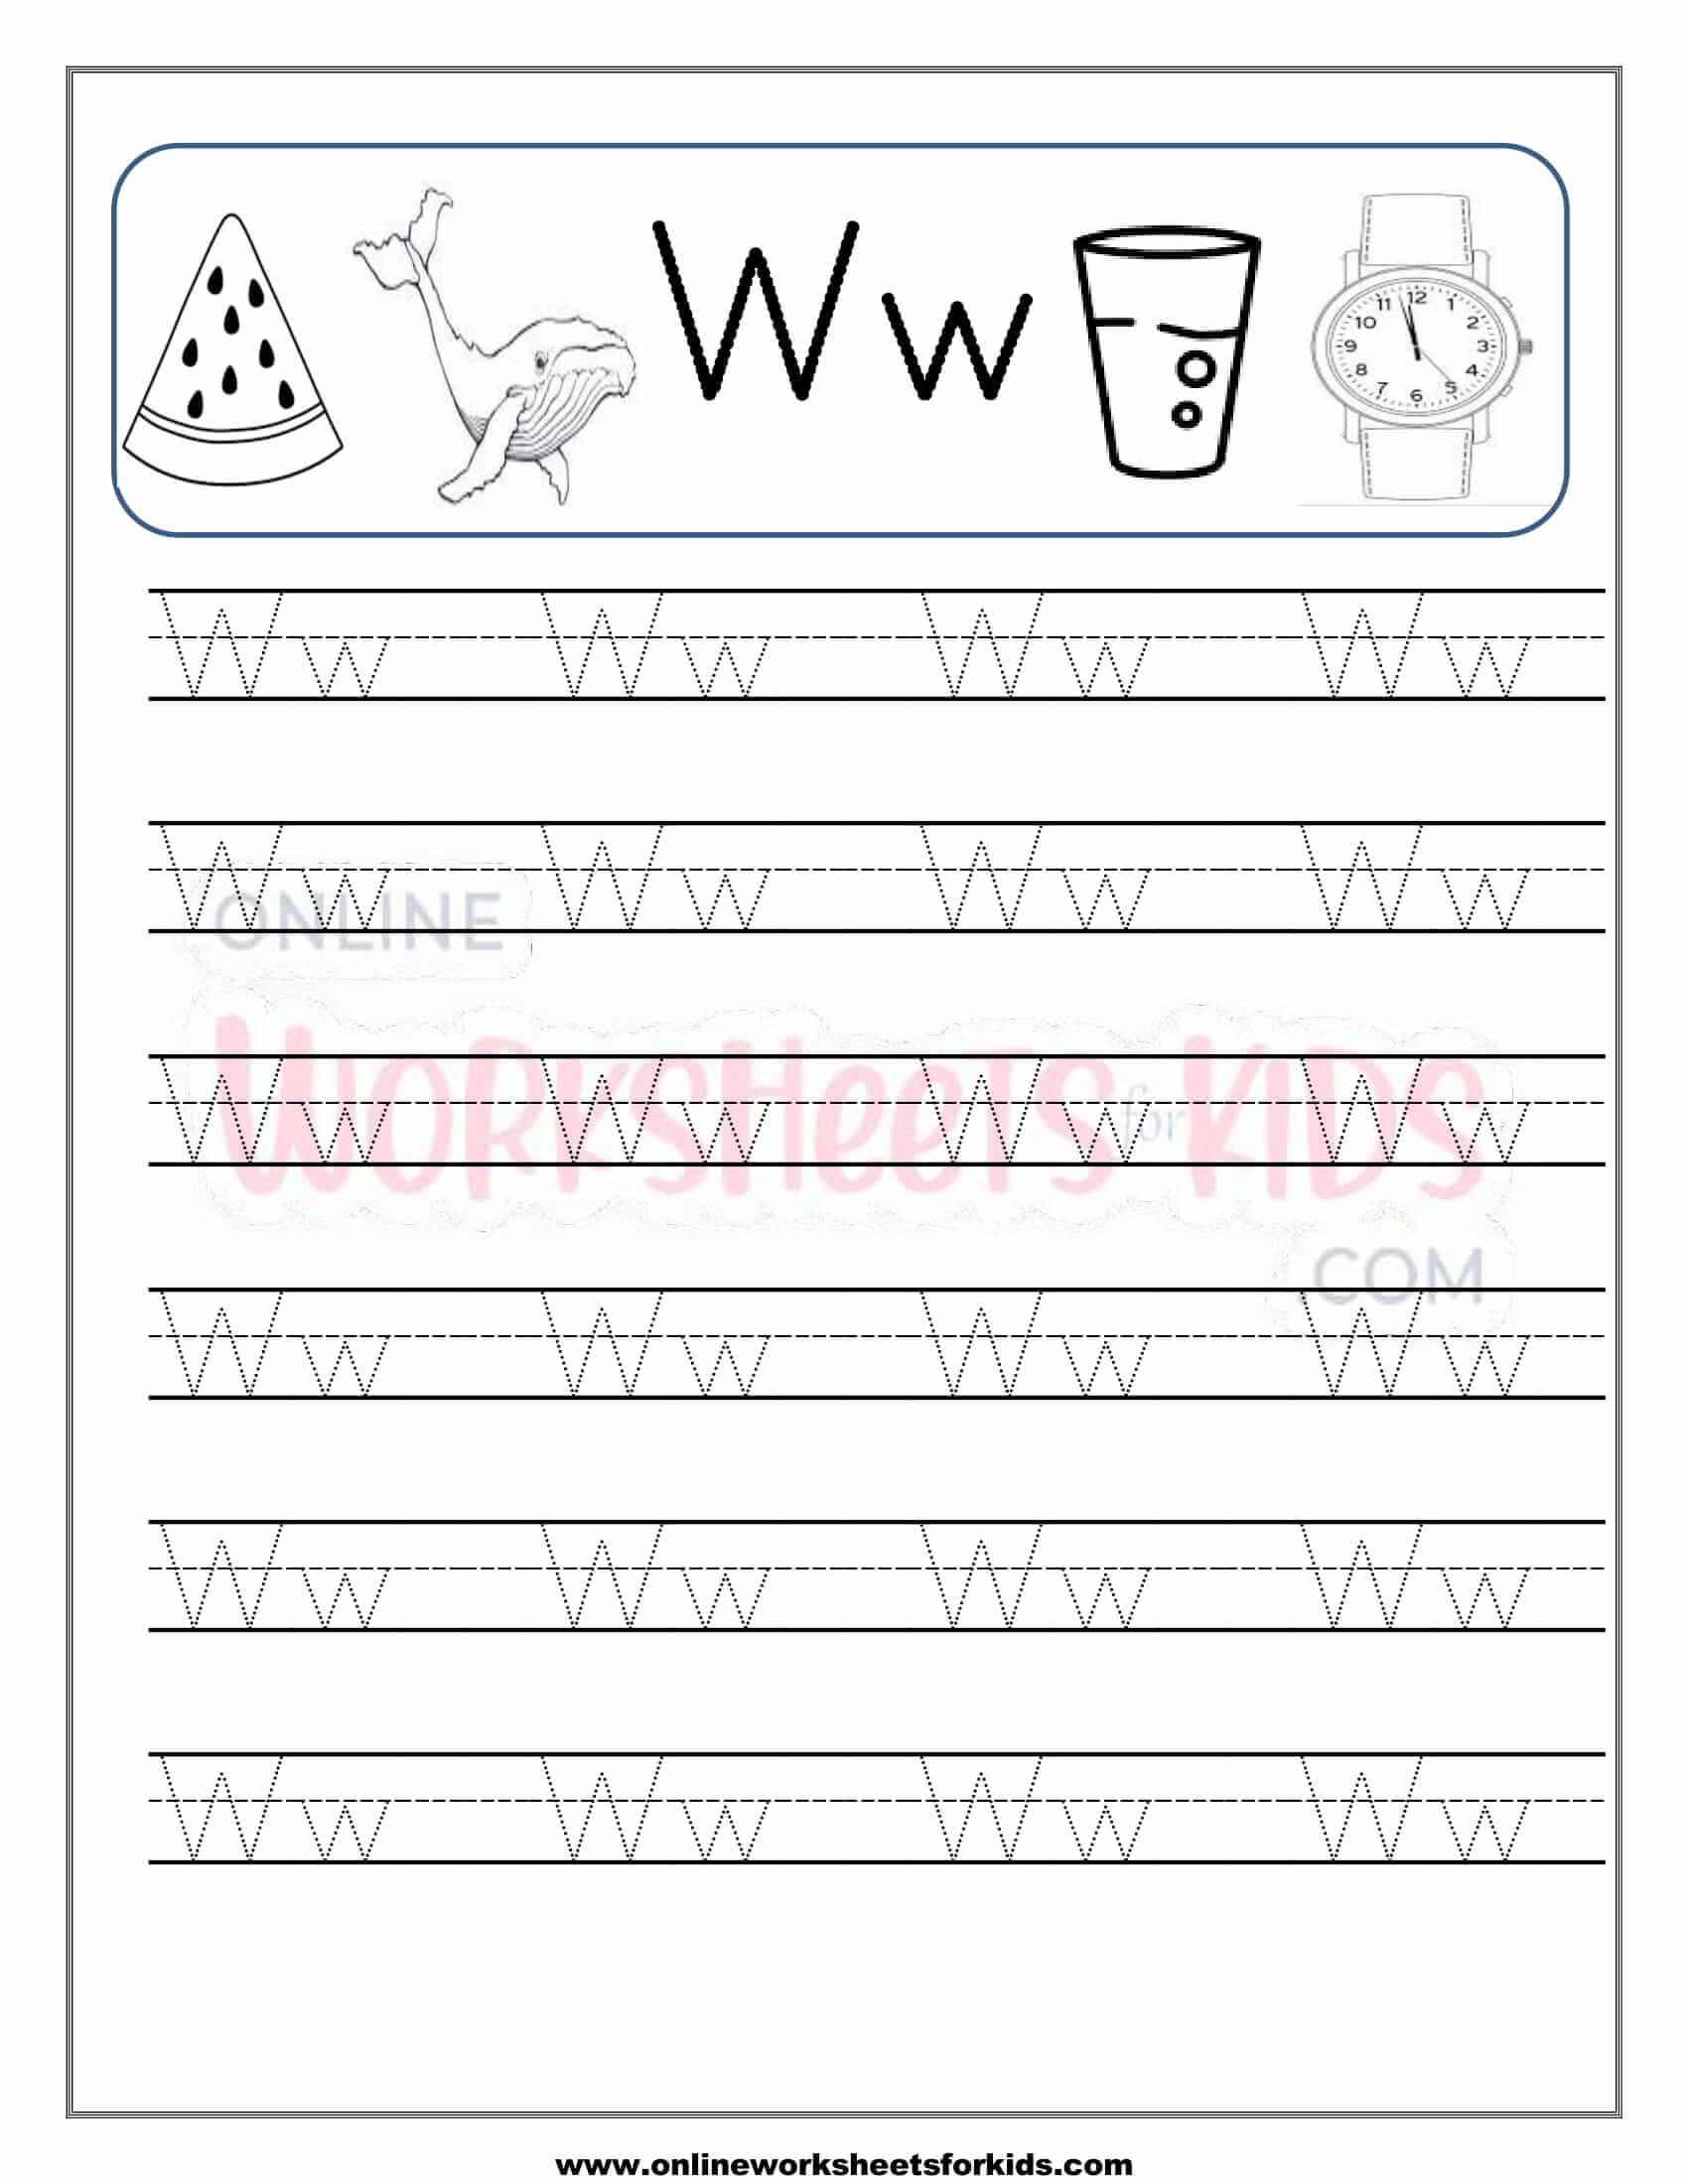 capital-and-small-letter-tracing-worksheet-26